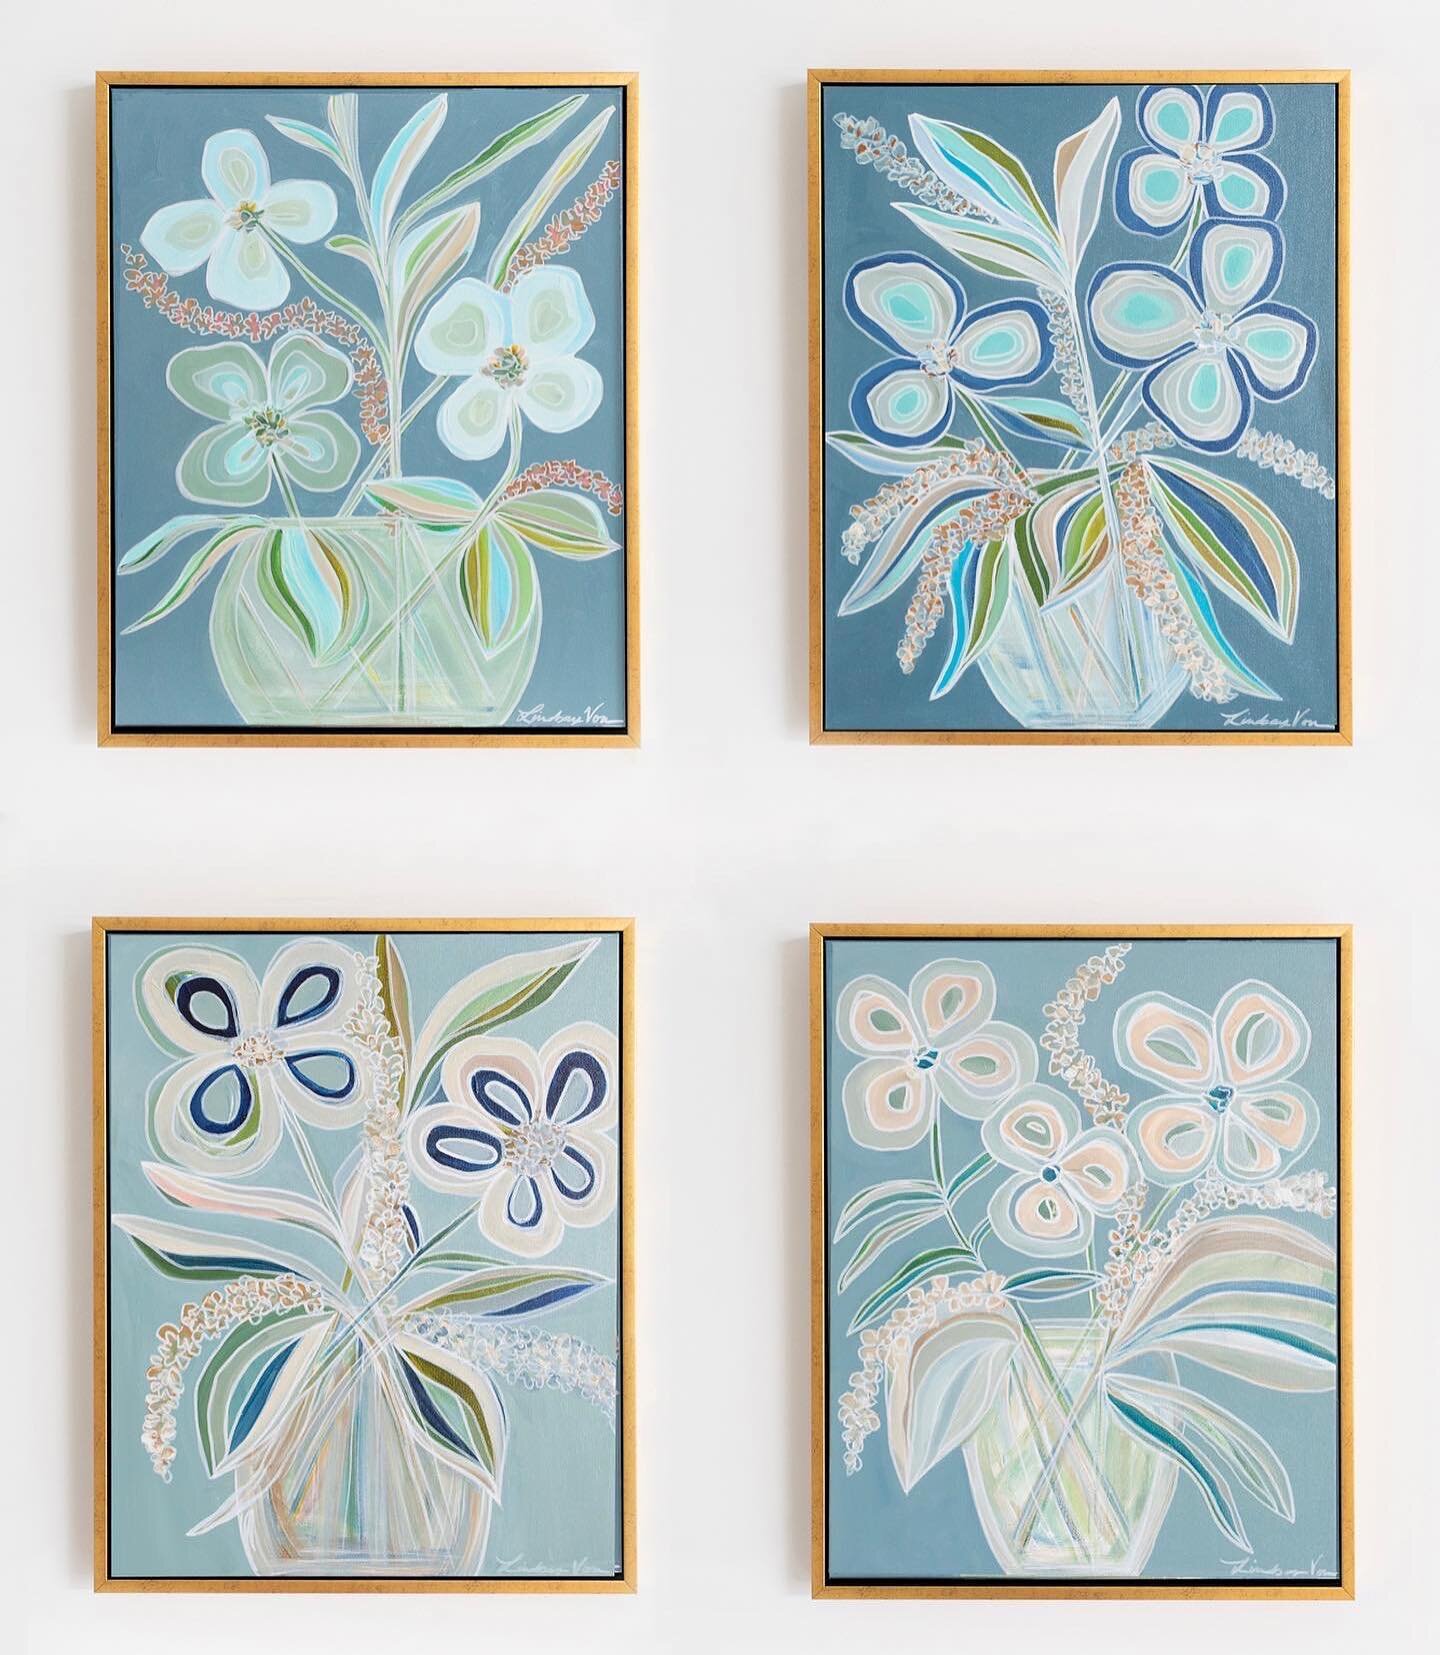 Small works // perfect for holiday gifting 🎁🎁 

Each are 16 x 20 in. framed in a gold floater frame. DM or comment if interested! 

#holidaydecor #holidayshopping #abstractartist #florals #atlanta #art #floralabstract #shoplocal #shopsmall #smallar